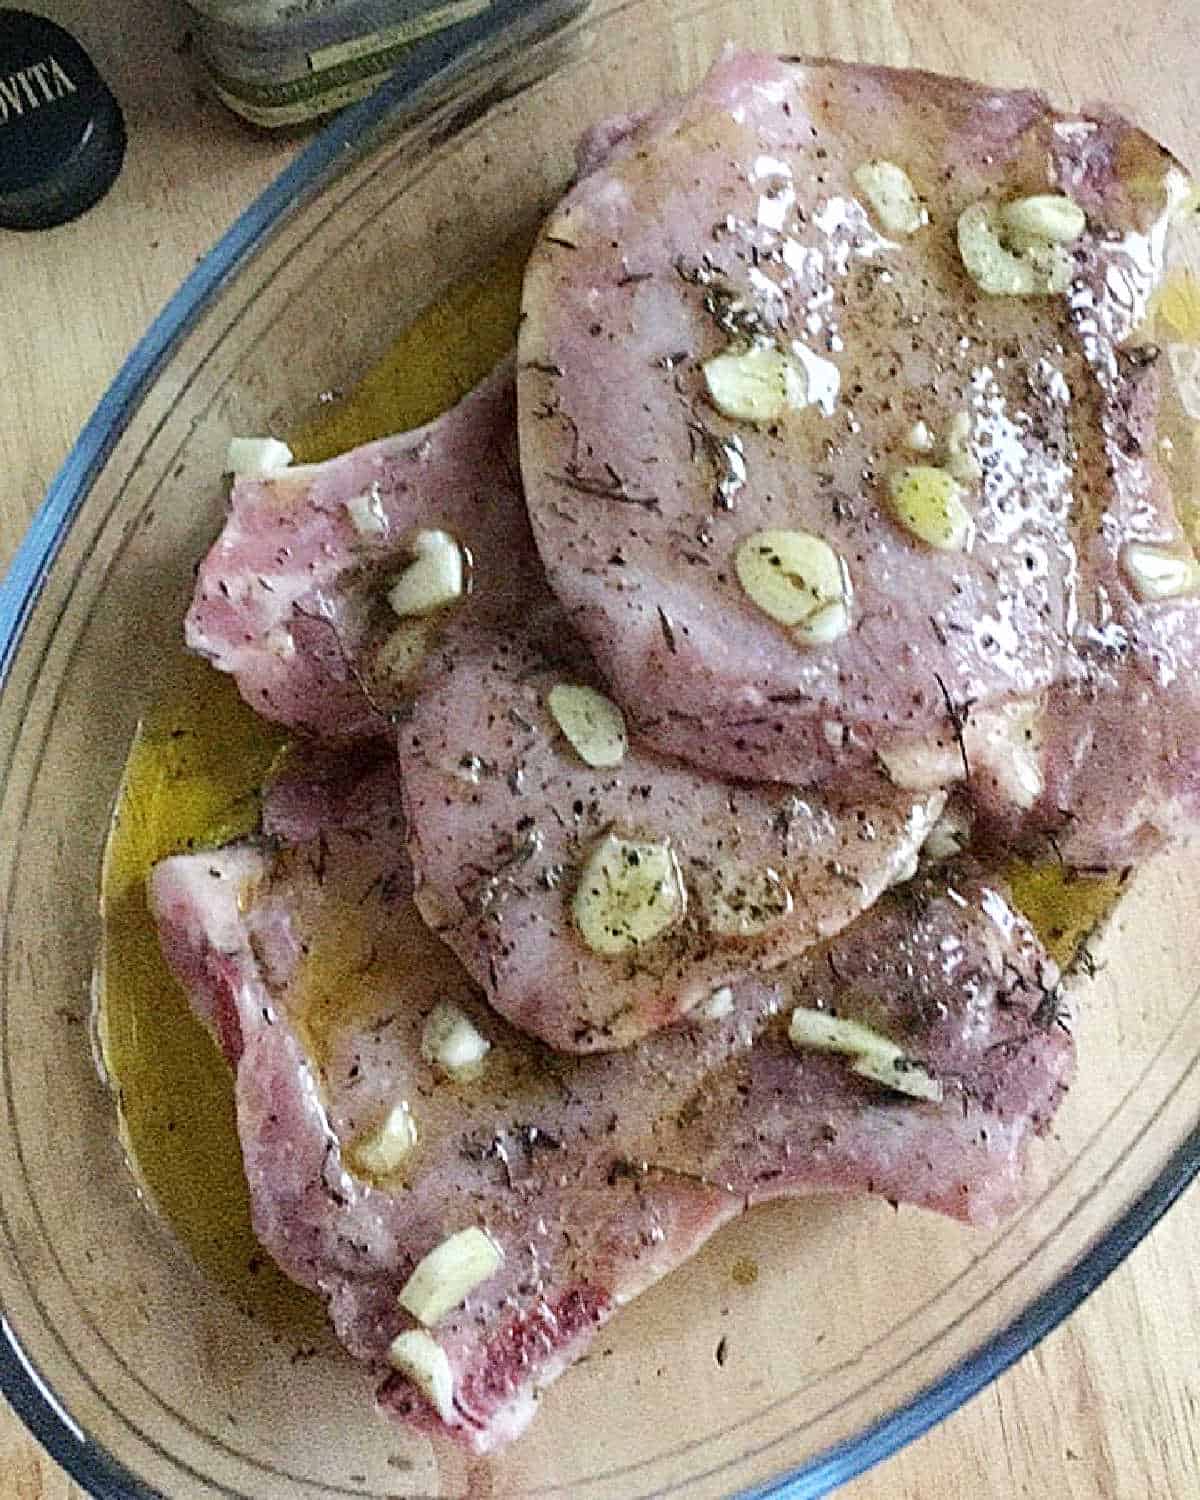 Pork chops marinating with garlic, thyme and olive oil in a glass dish.